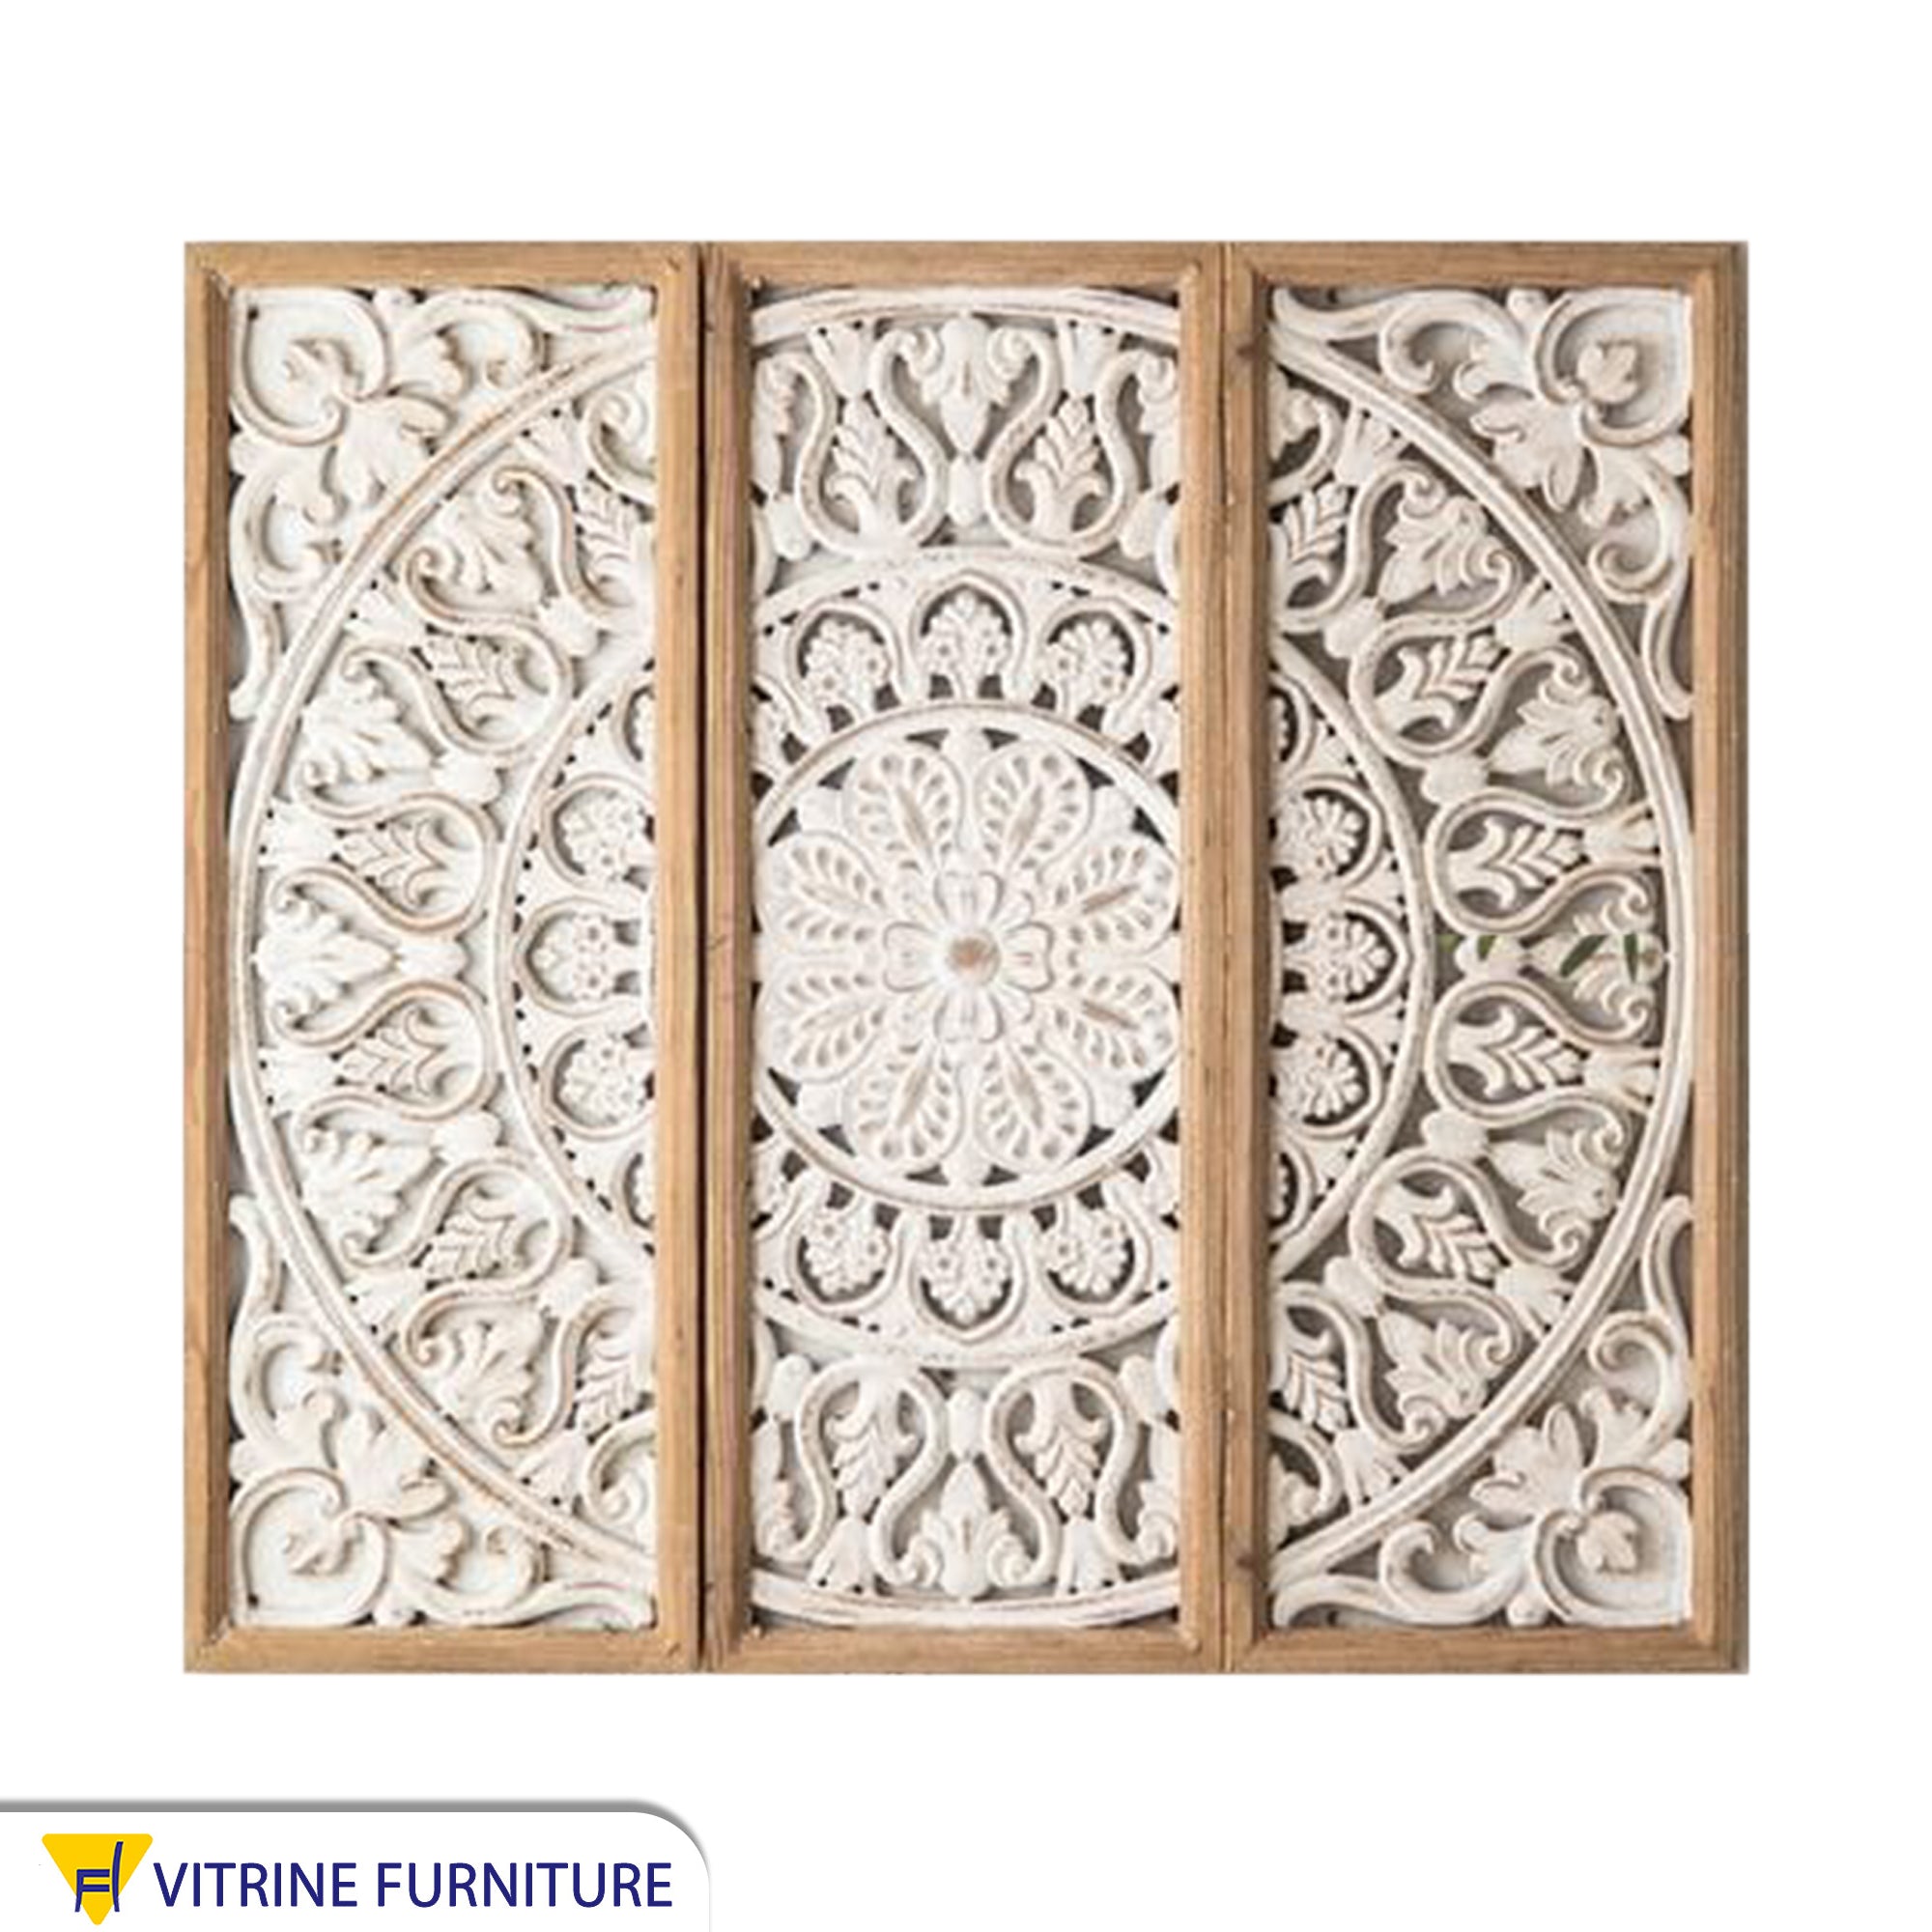 A wall panel carved in the shape of a three-dimensional flower